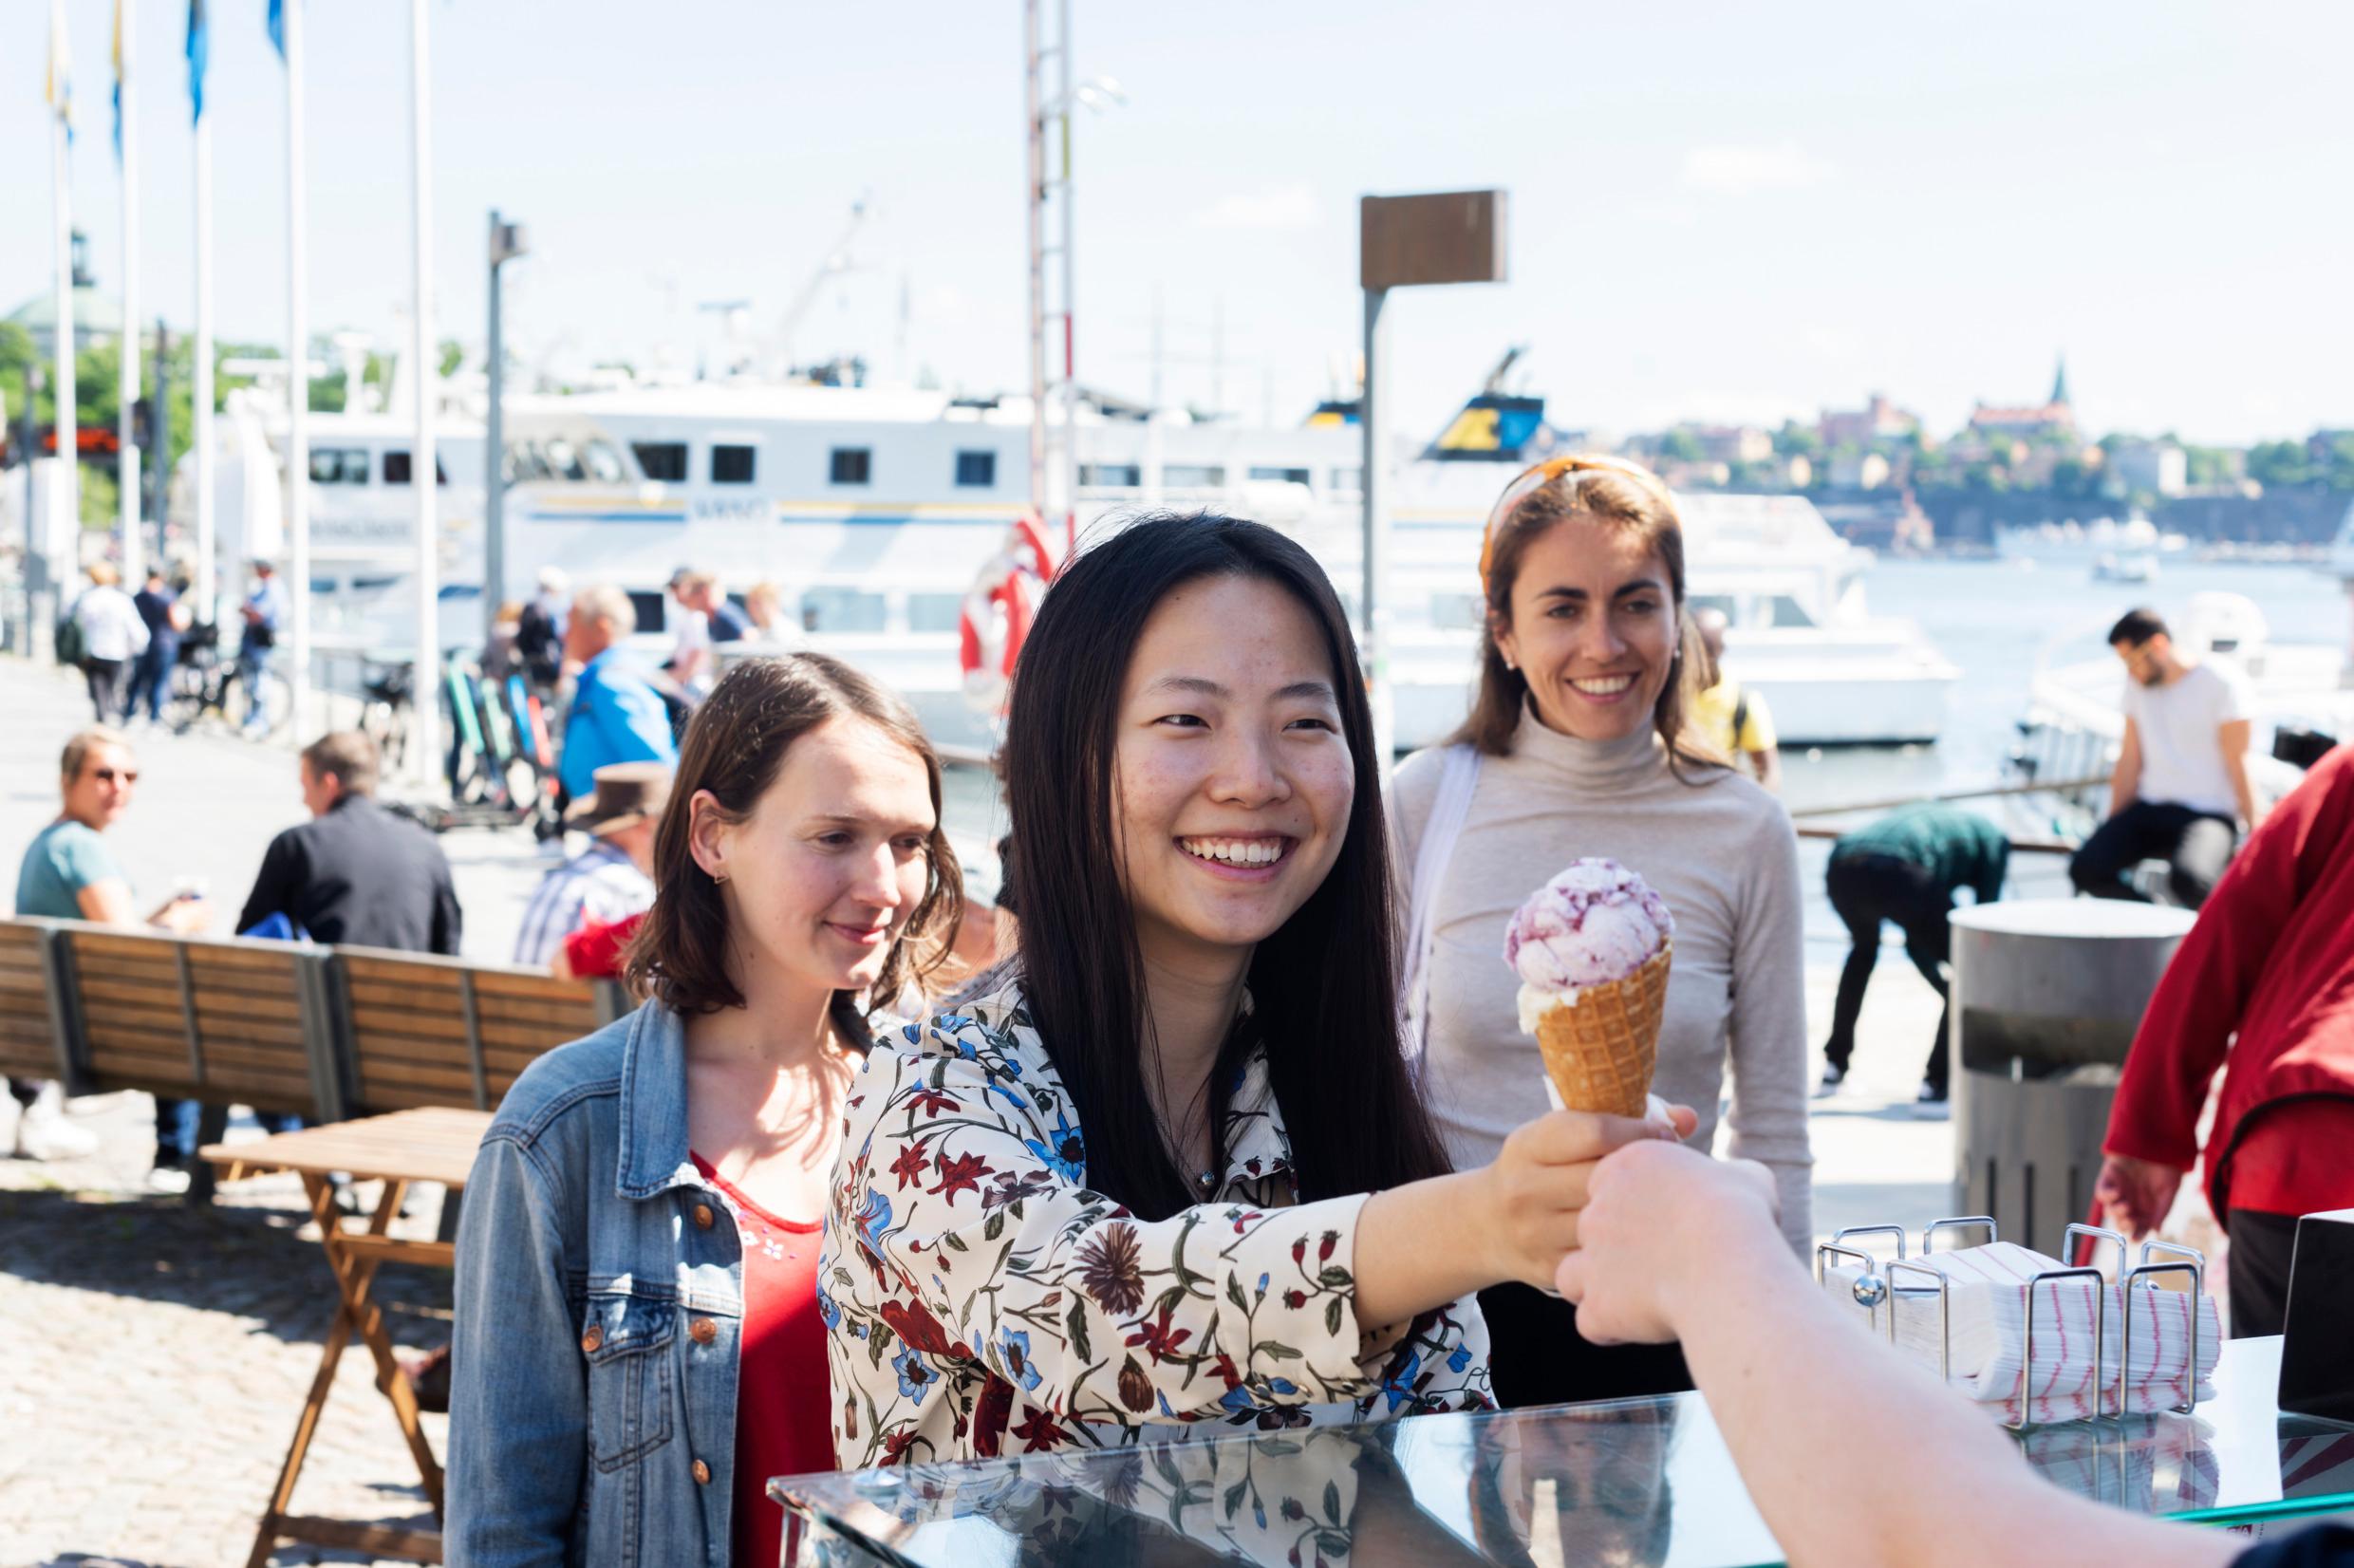 A woman is receiving an ice cream from a vendor. There's a body of water with boats in it in the background, as well as people lining up for the vendor.